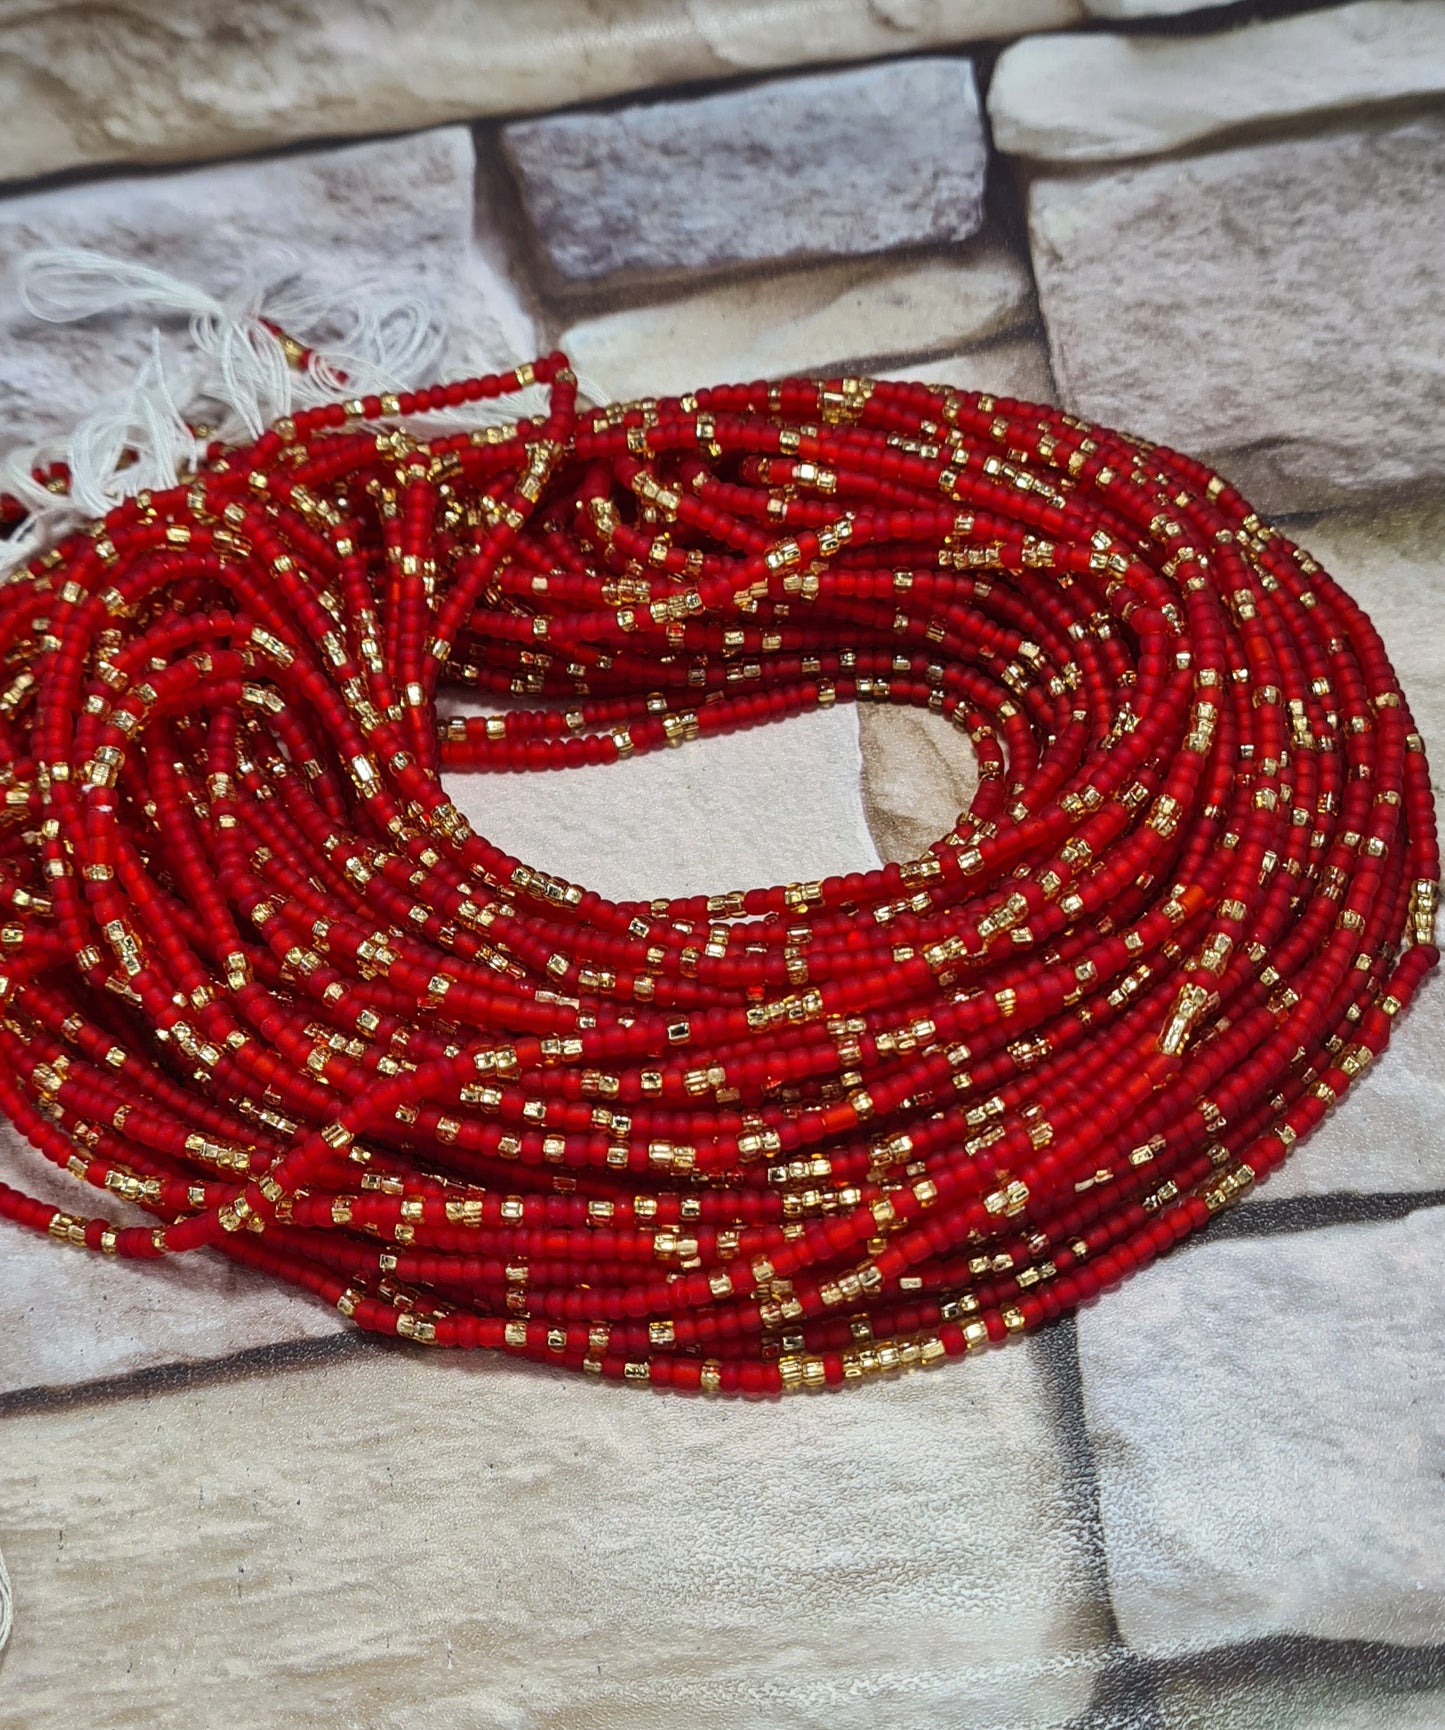 Red and Gold Waist Beads|On Sale Belly Chain Weight control African beads|belly beads| Ghana beads| Weight Tracker| Nigerian waist beads